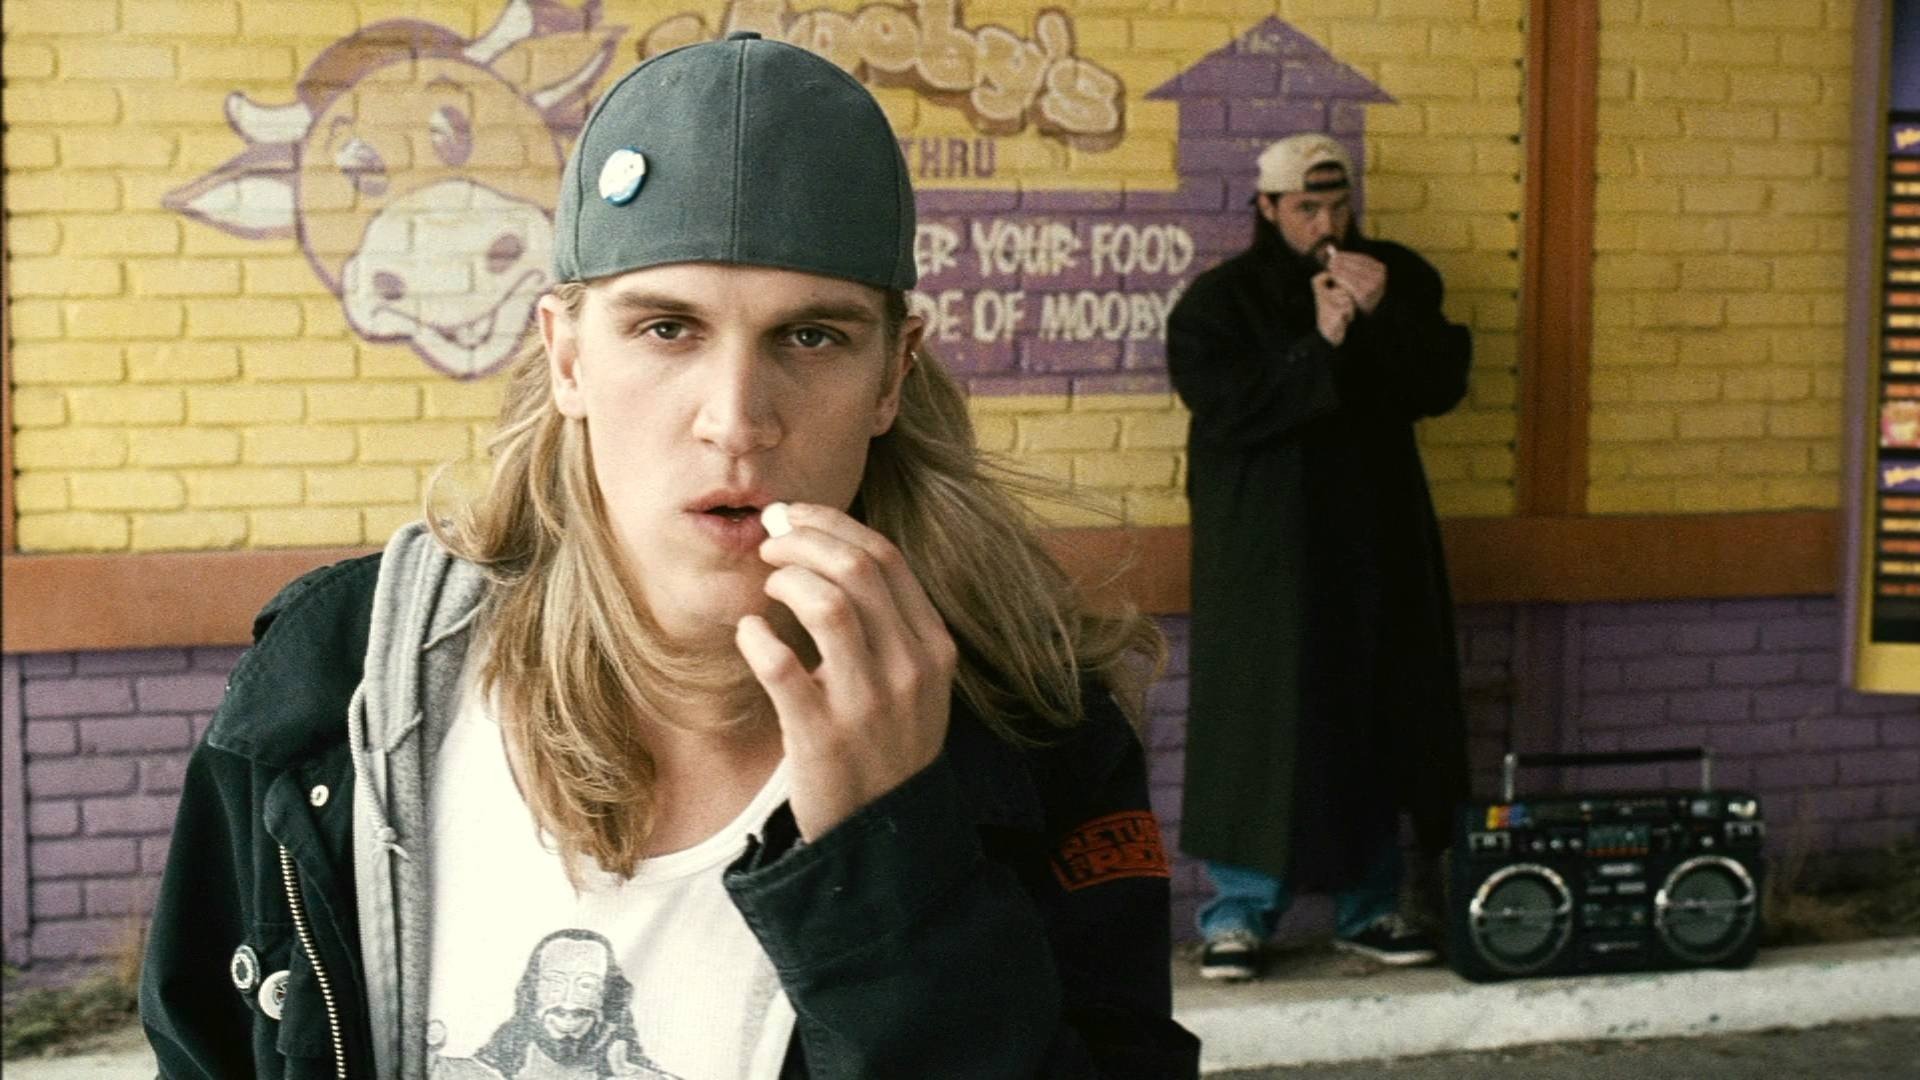 Clerks Edy Jay Silent Bob Funny Humor Indie Wallpaper Background